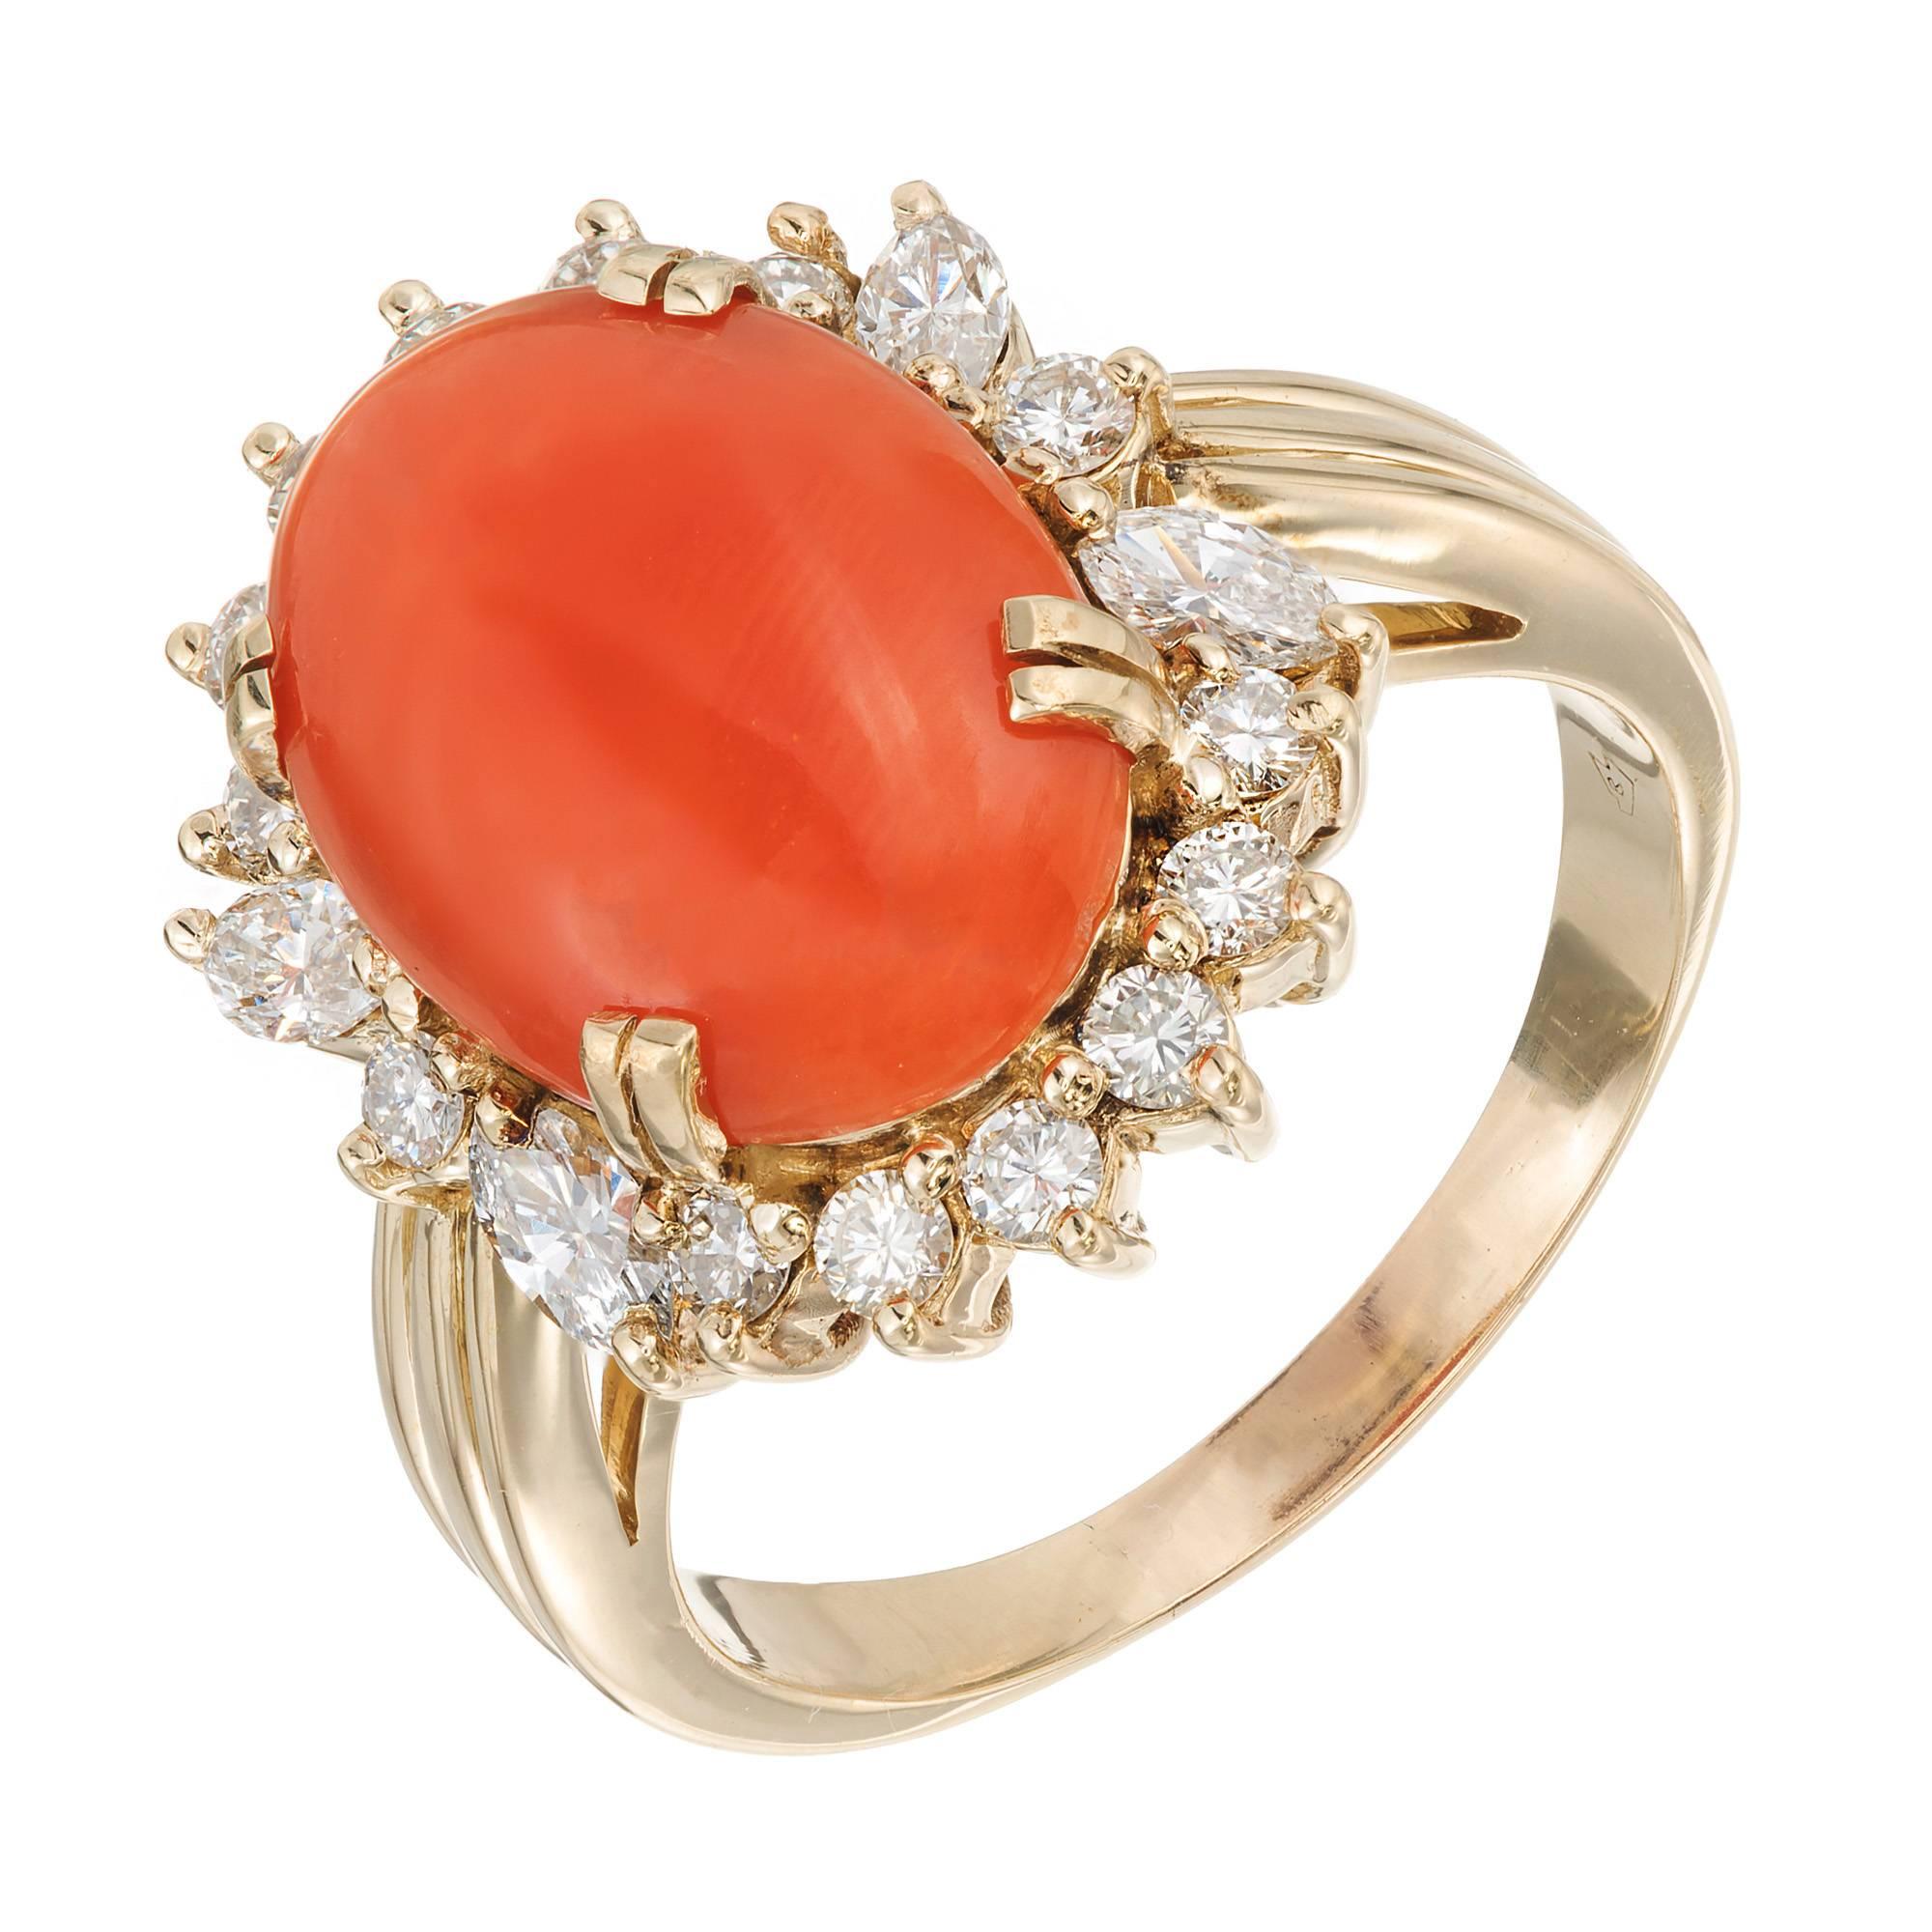 Mid-Century beautifully polished certified natural orange ova Coral and diamond cocktail ring. Surrounded by a halo of Marquise diamonds in a 14k yellow gold setting. GIA Certified.

1 oval cabochon orange Coral 14.07 x 10.07 x 3.45mm GIA